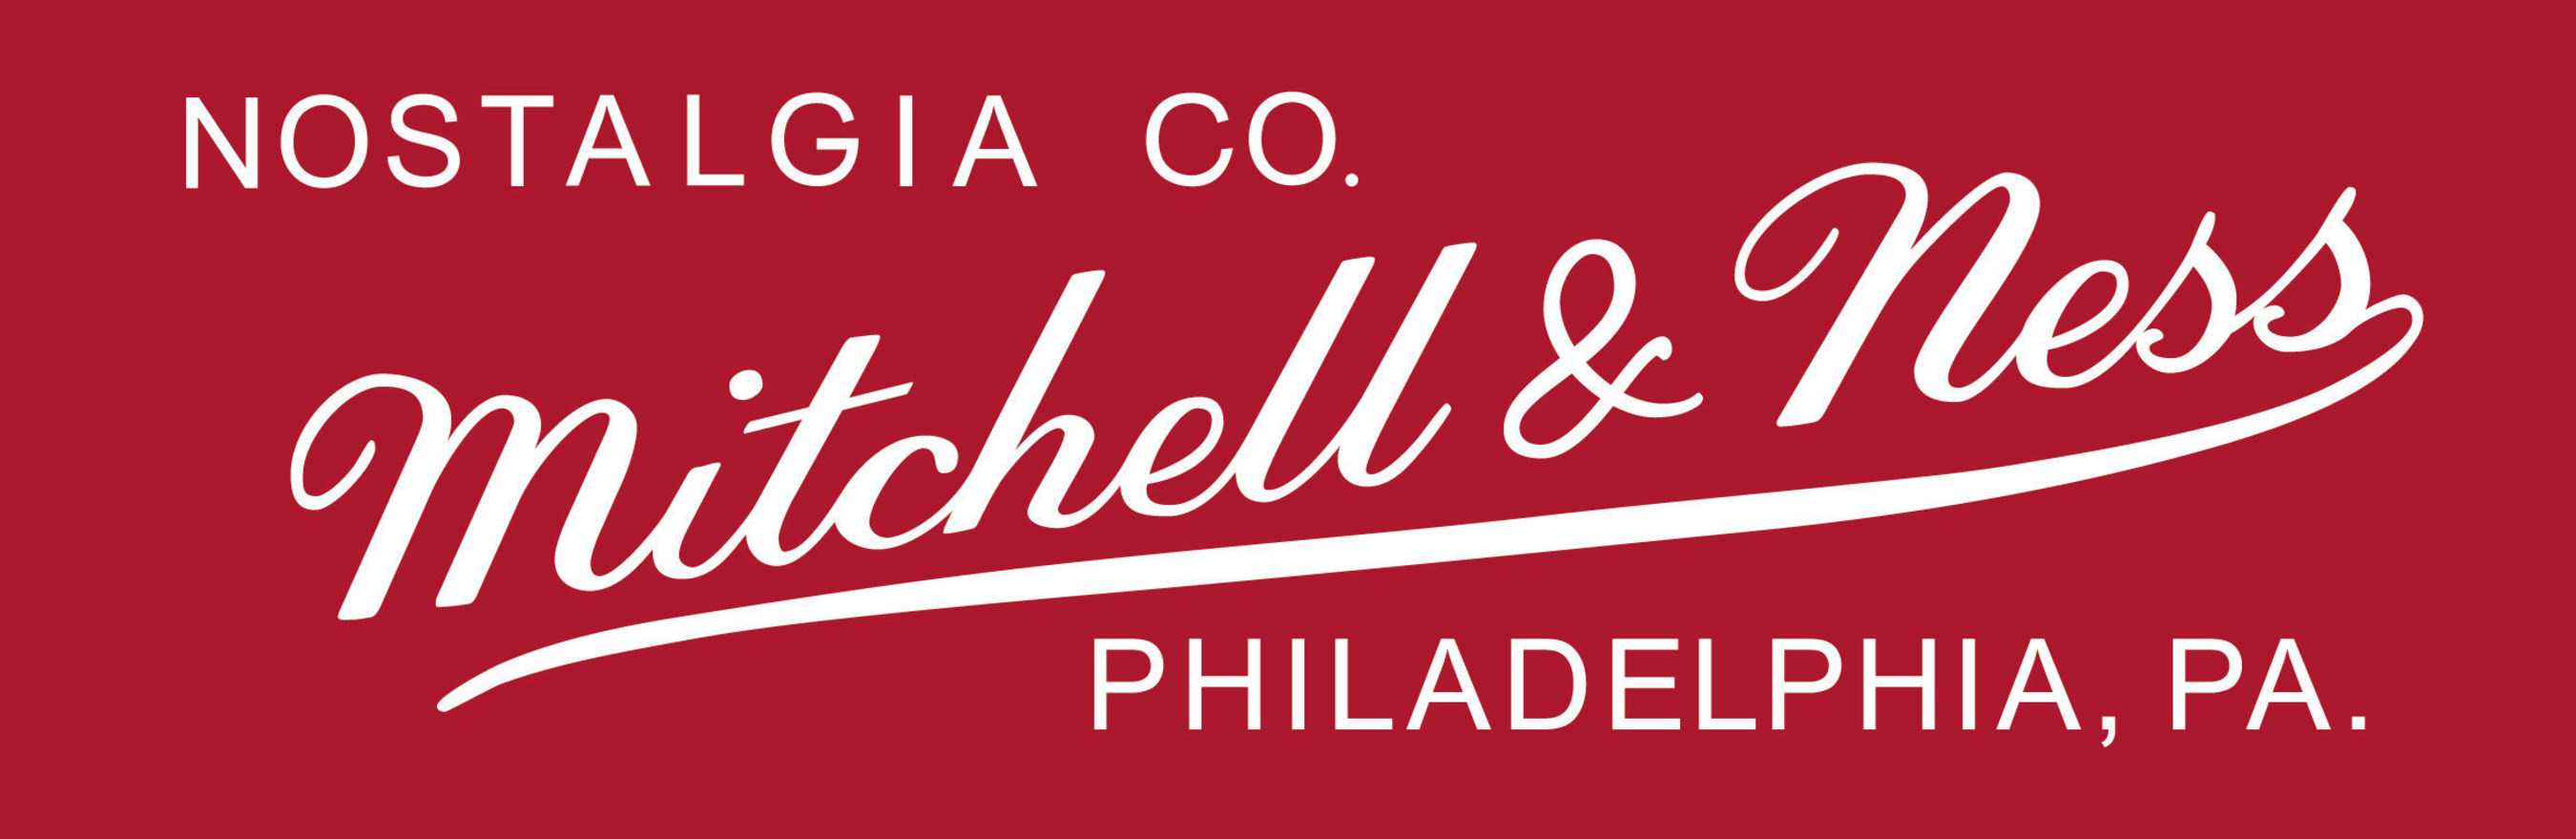 mitchell and ness owner